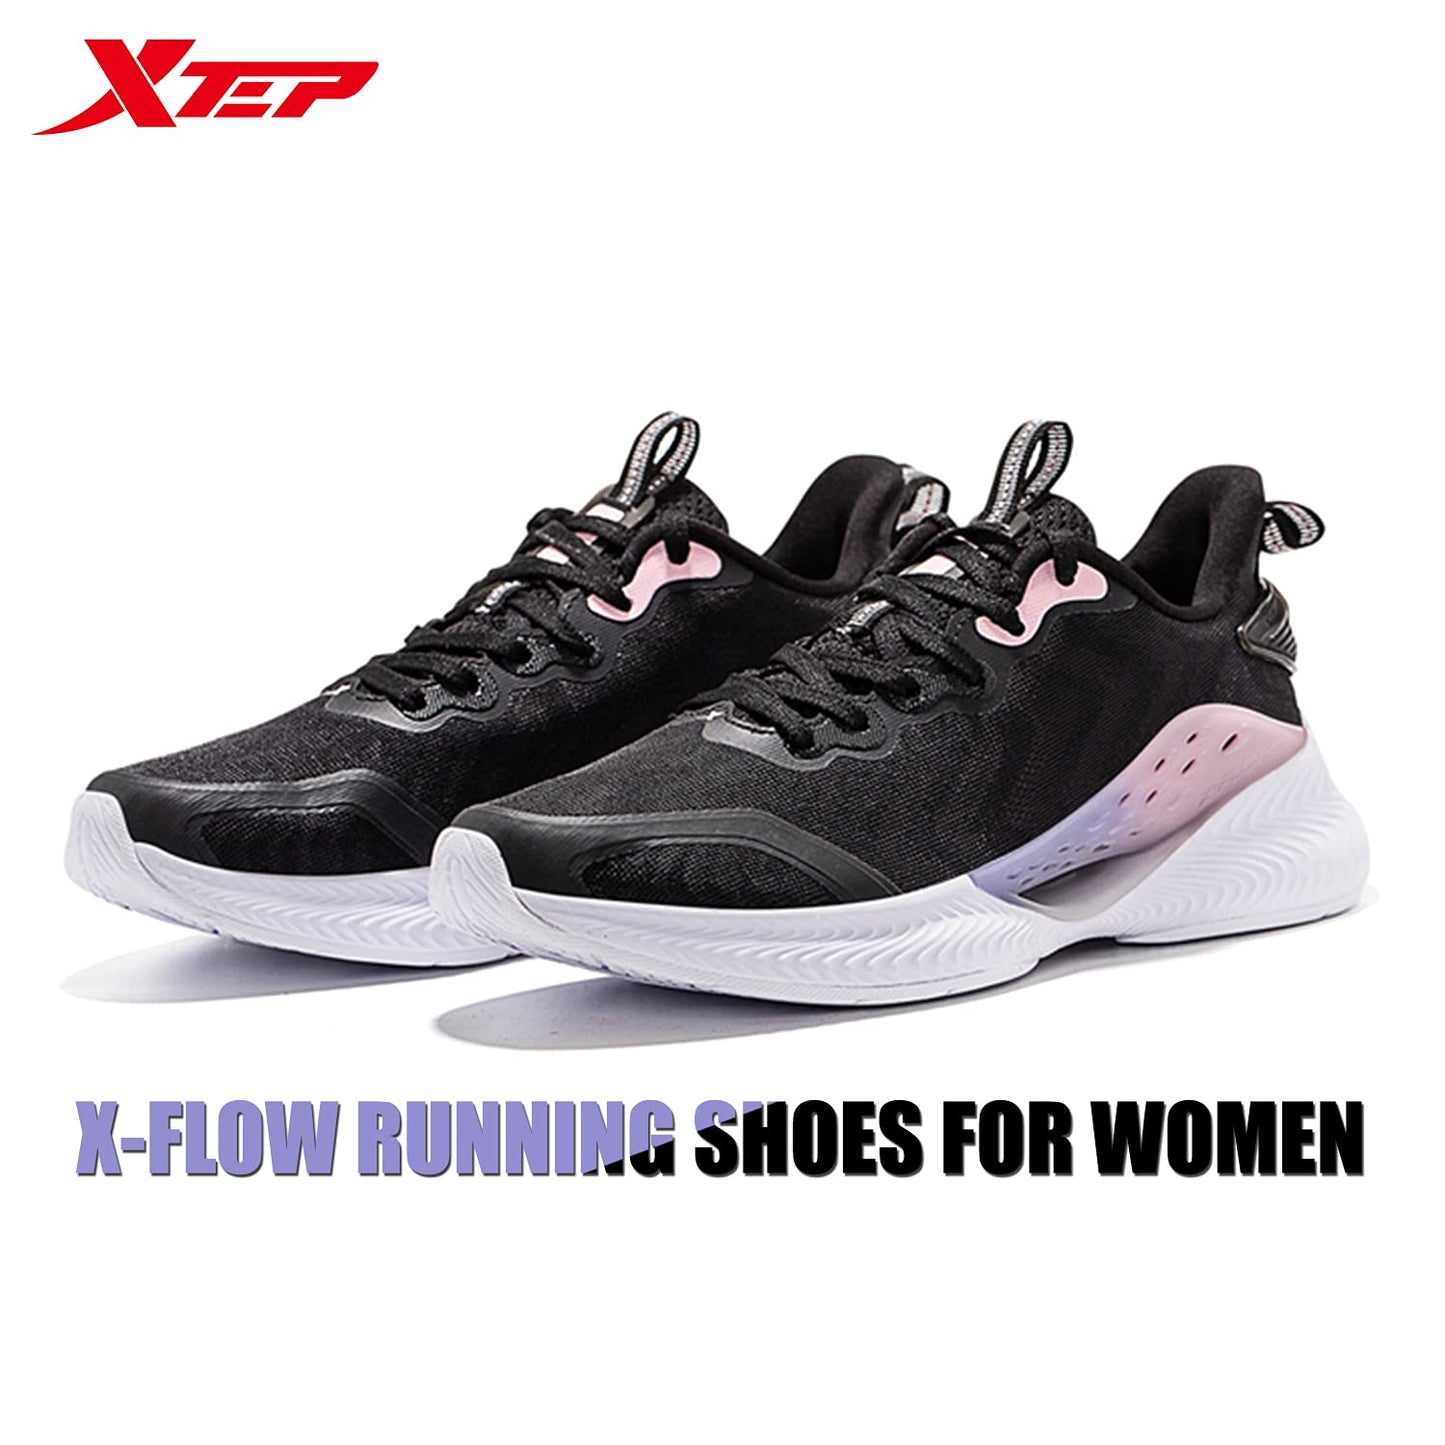 XTEP Women's Black Textile Synthetic Leather Upper Flexible RB Sole Running Shoes (3 UK)